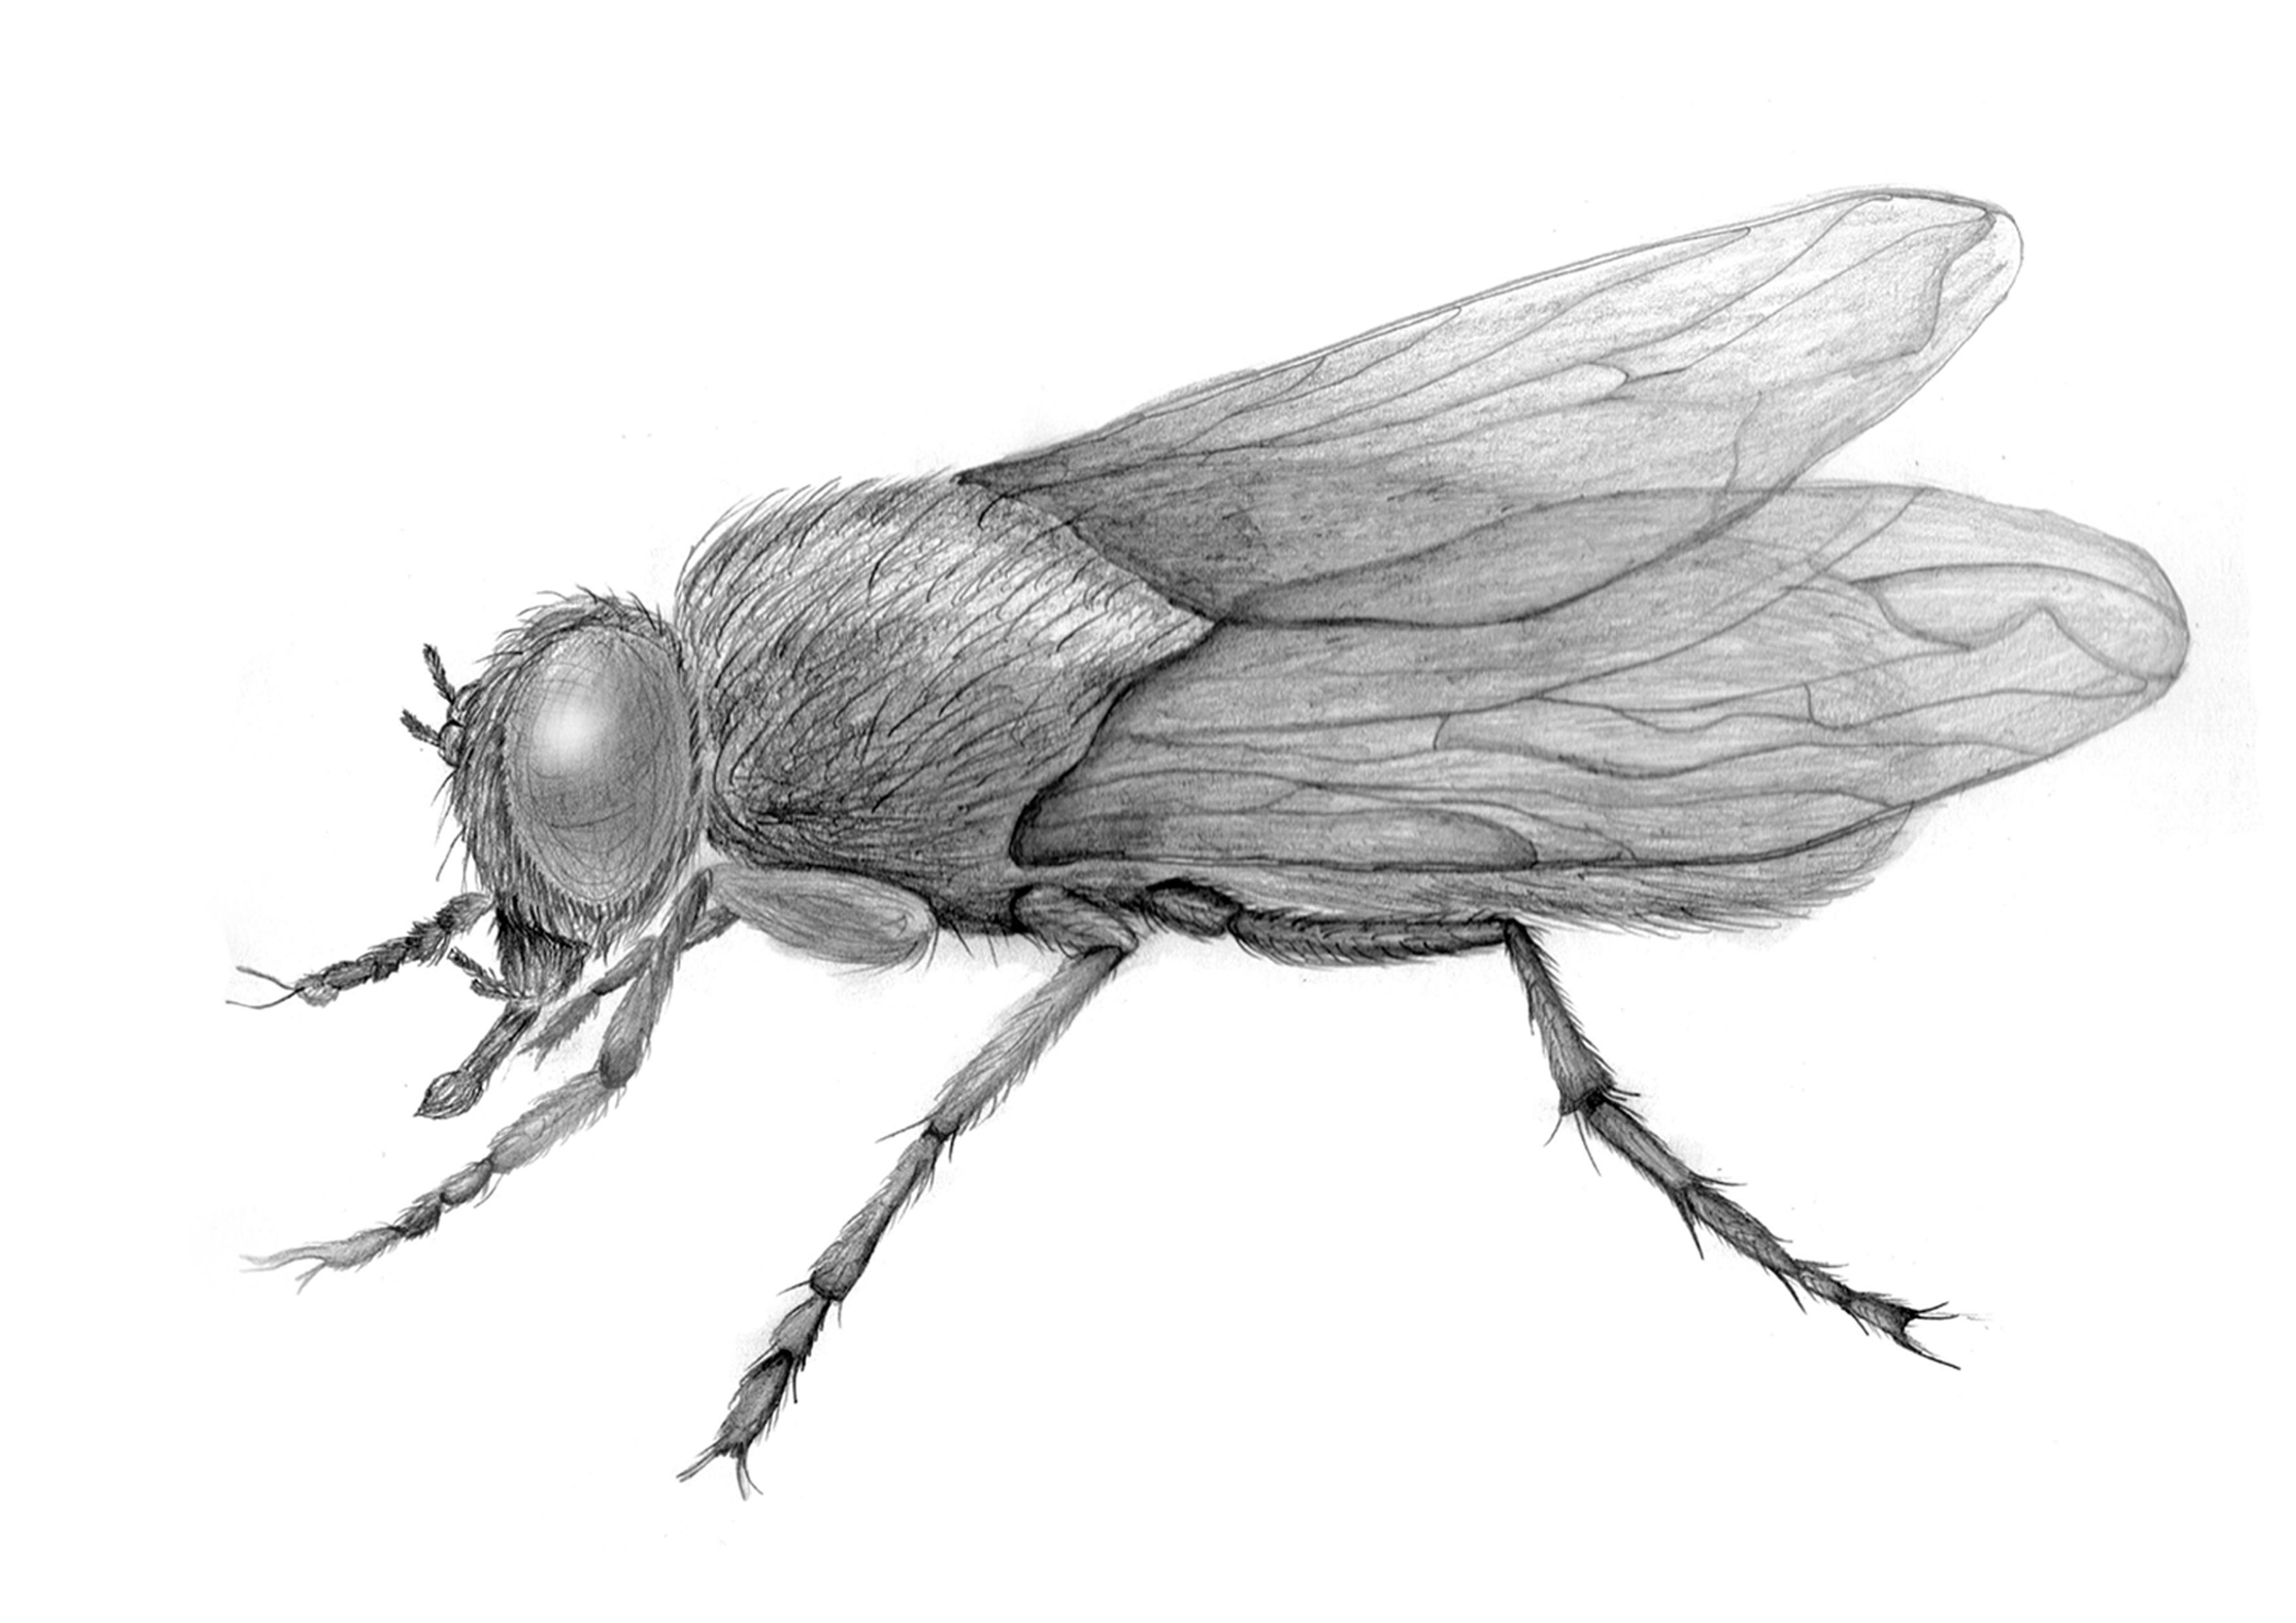 pencil drawing of a fly insect sketch | Drawings | Pinterest ...